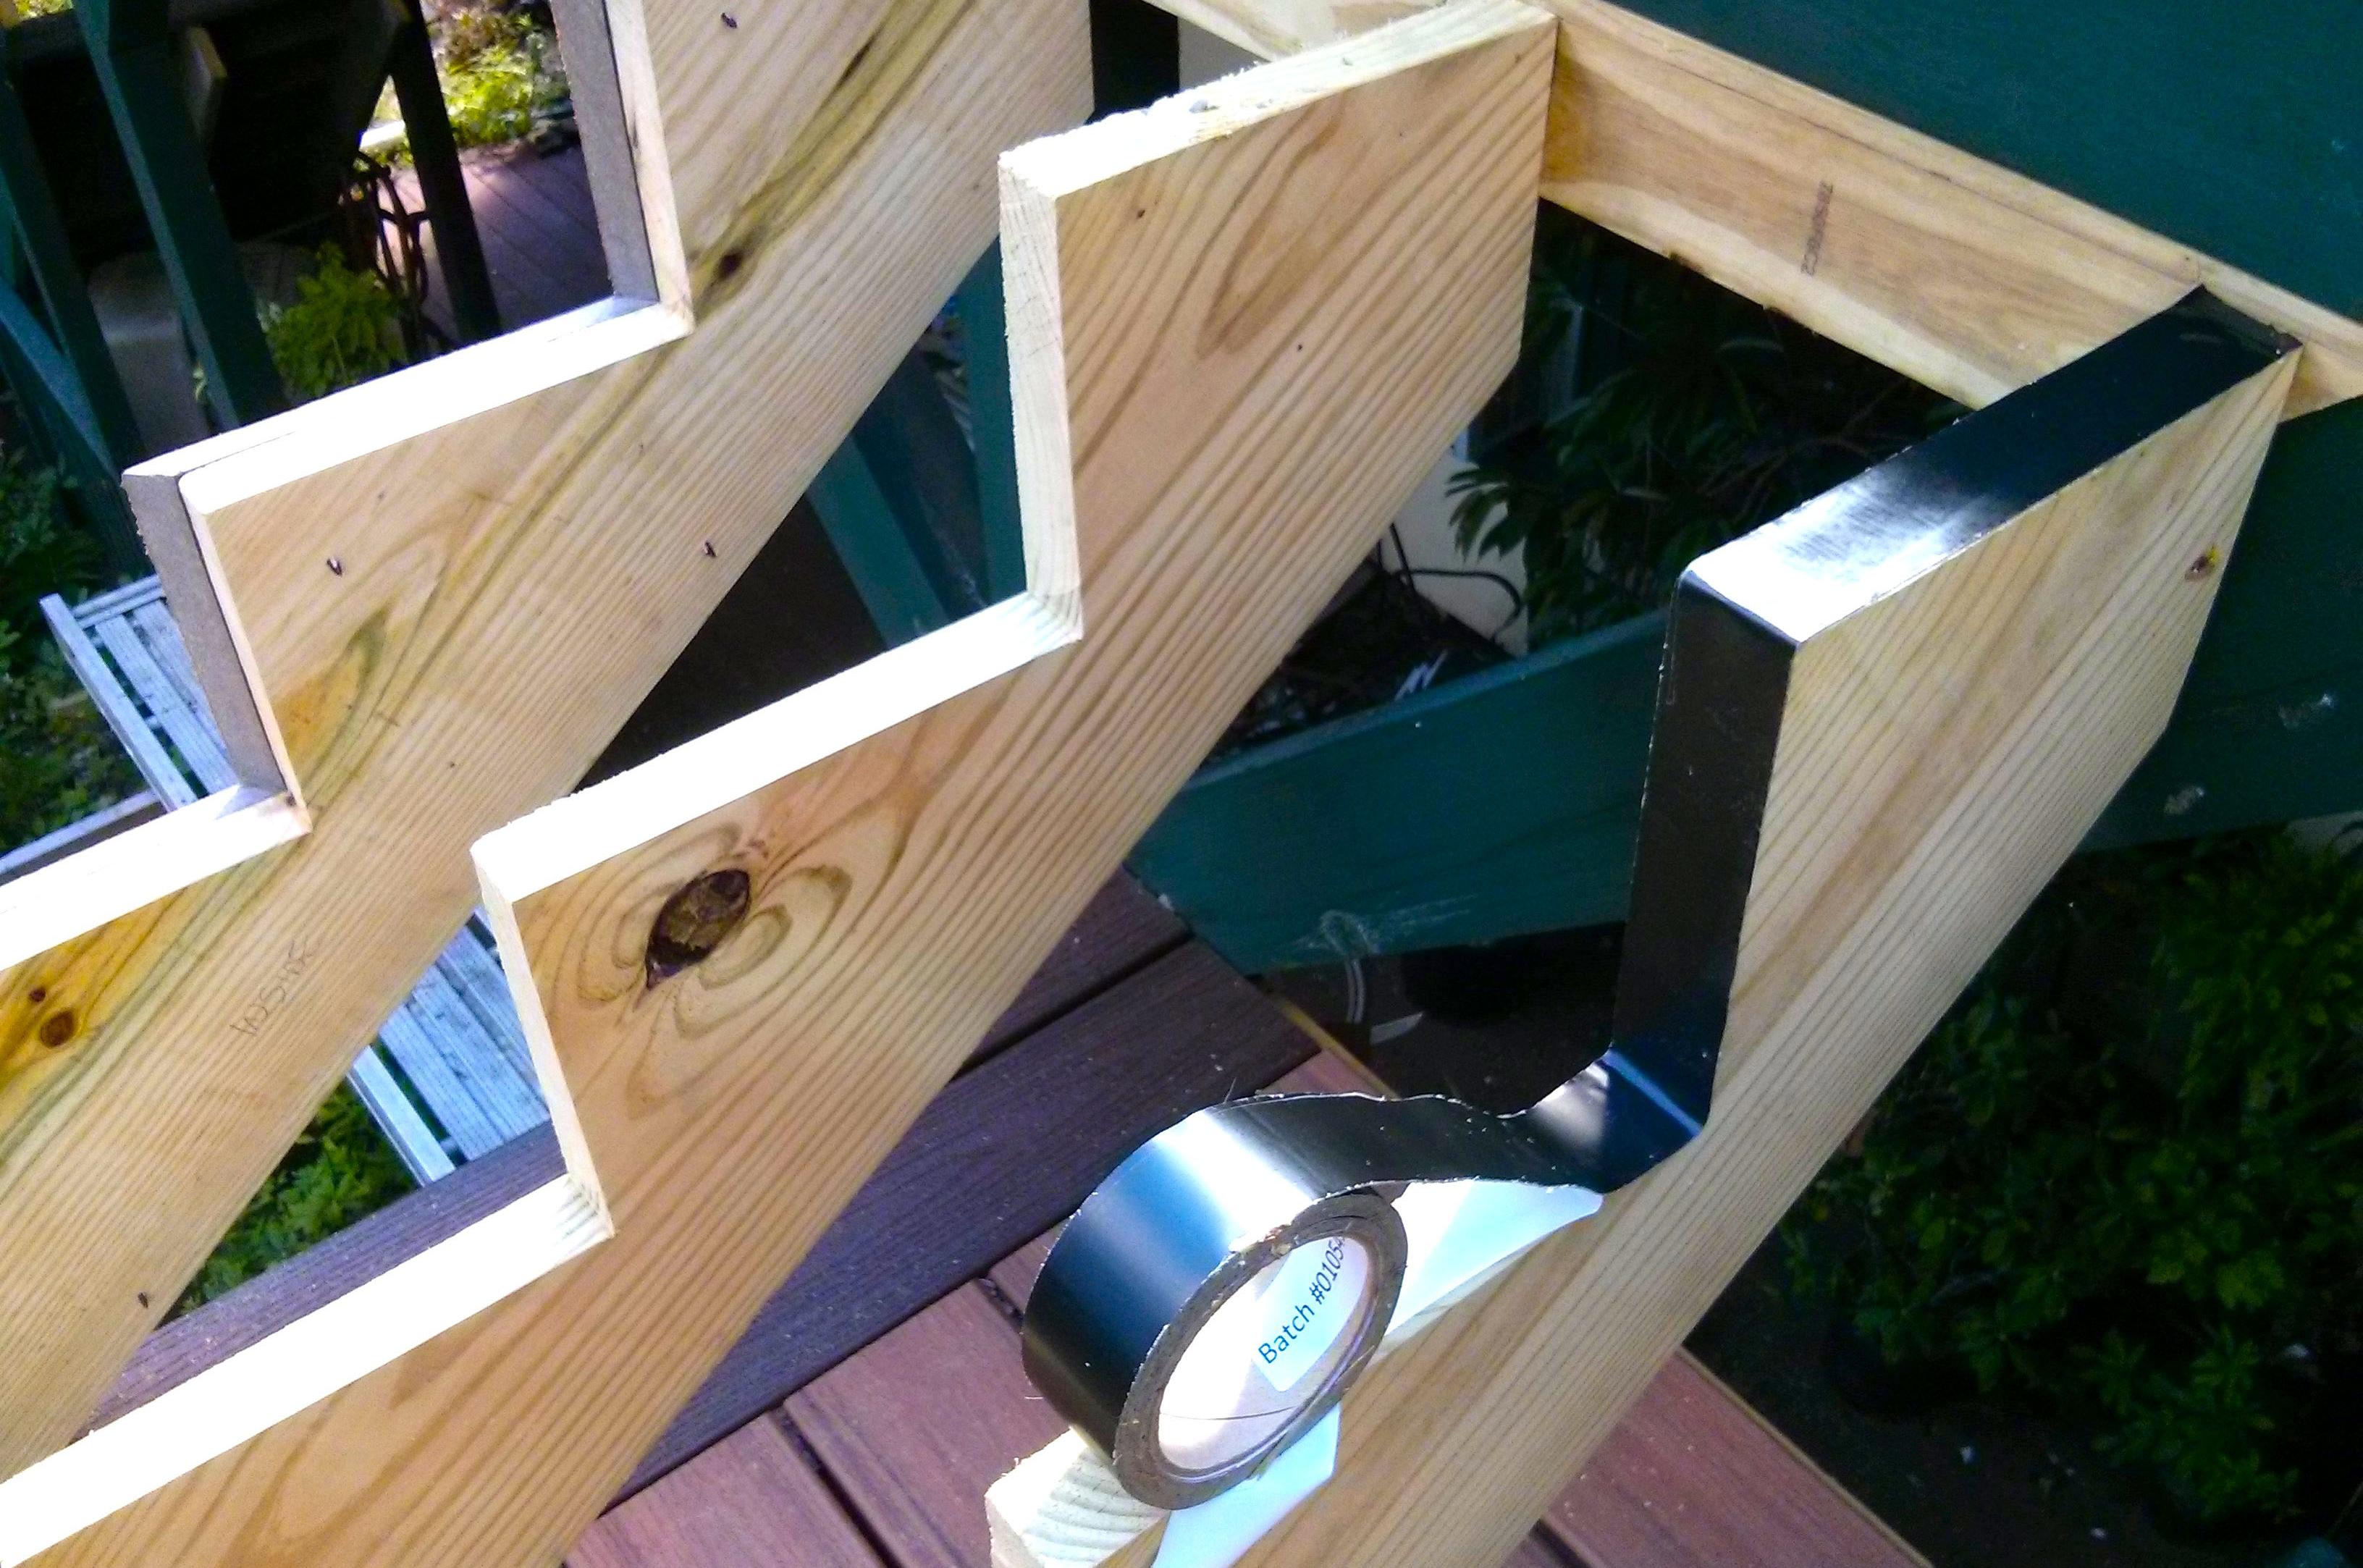 How to build exterior stairs that last | The Spokesman-Review